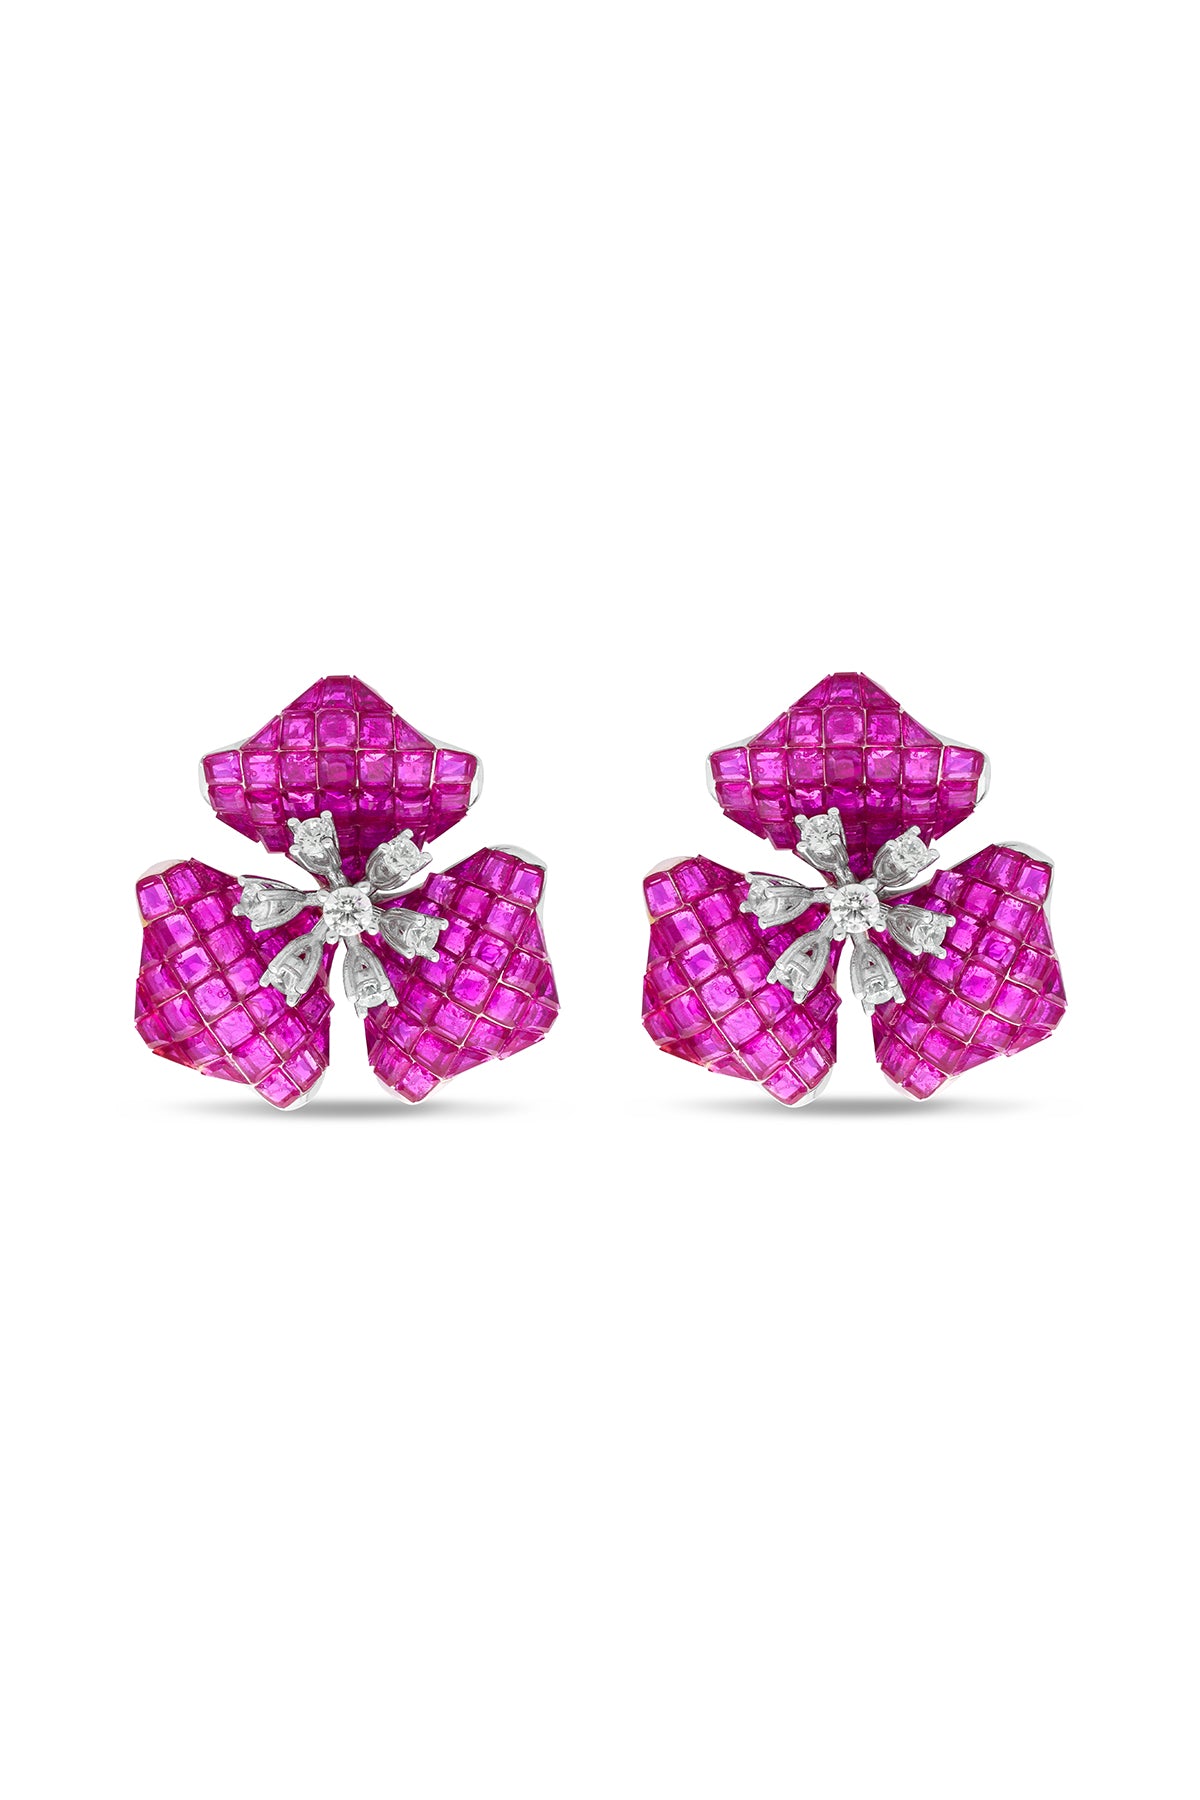 Ethereal Ruby Trillium Blossom Ear Studs